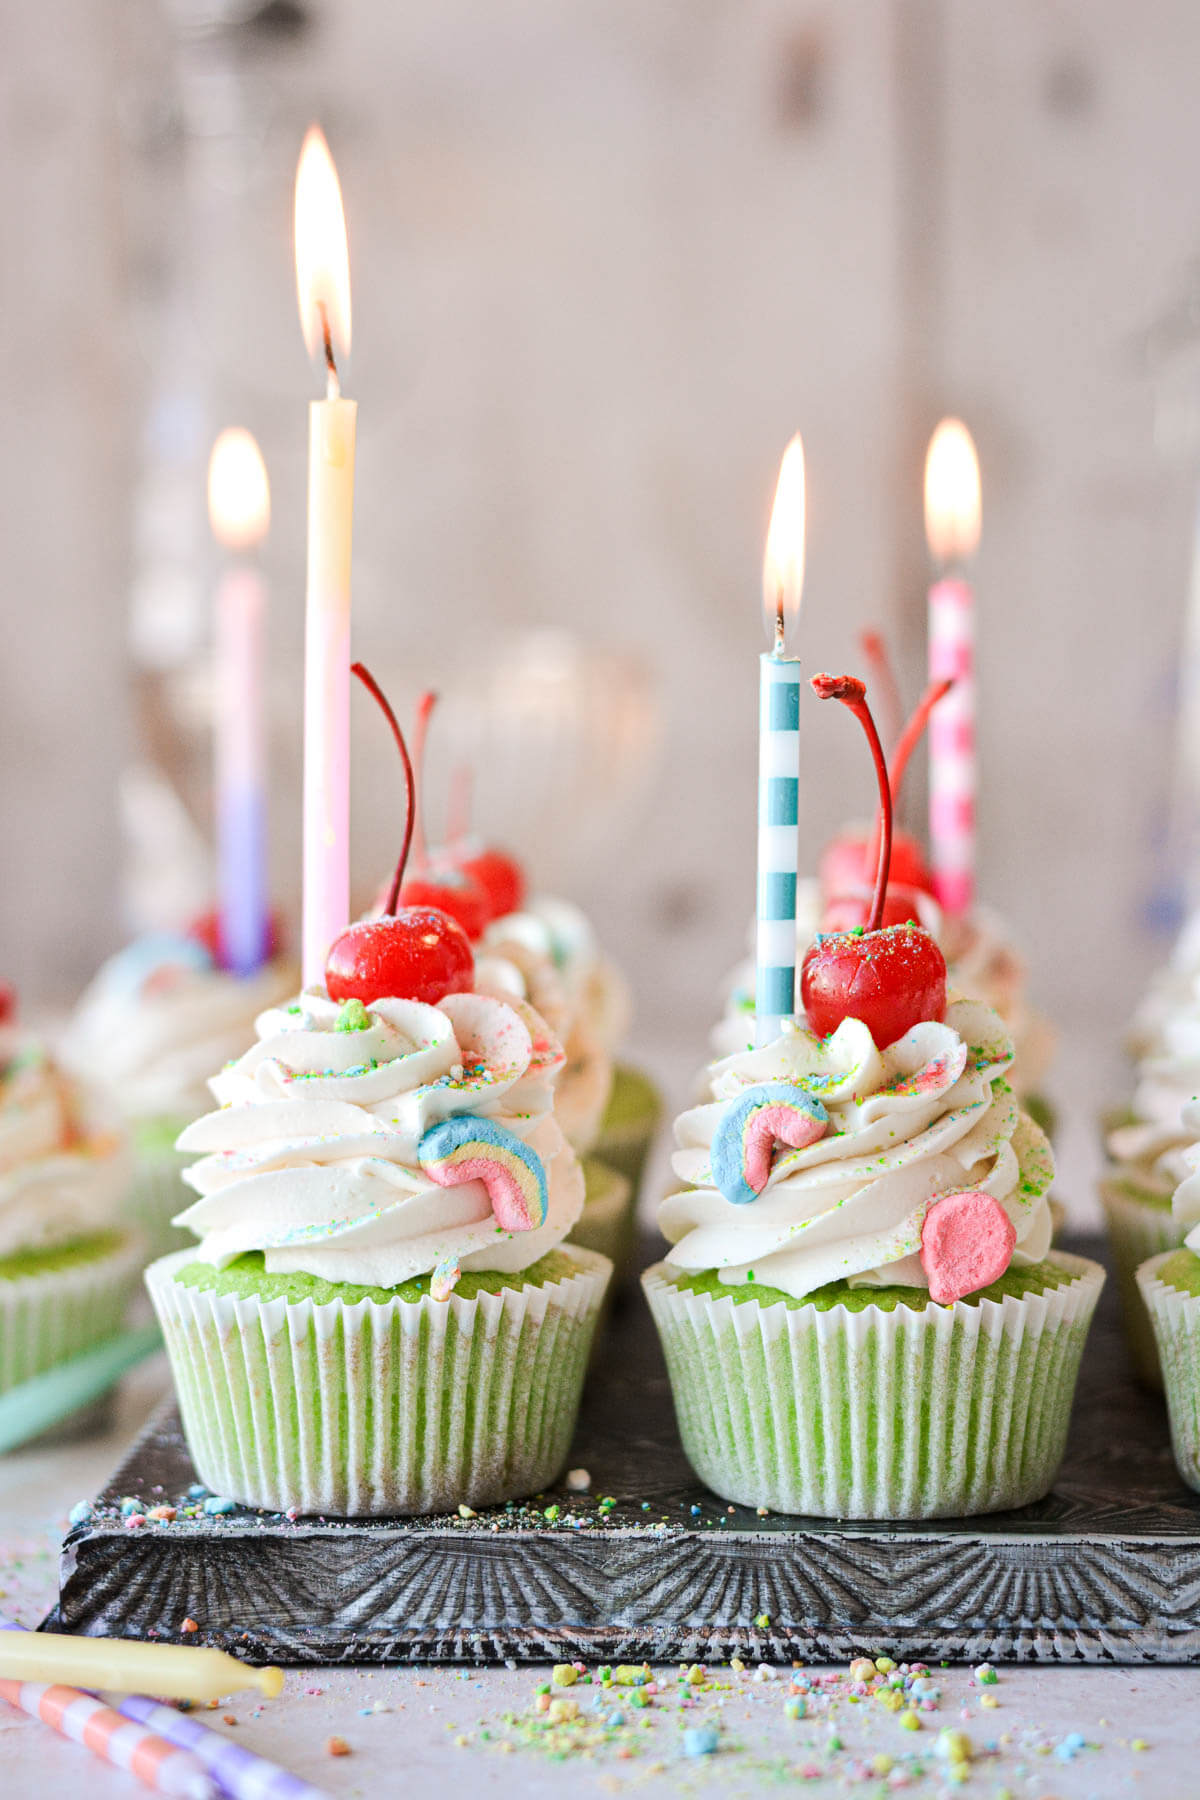 Green shamrock shake cupcakes with maraschino cherries, Lucky Charms marshmallows, and birthday candles.